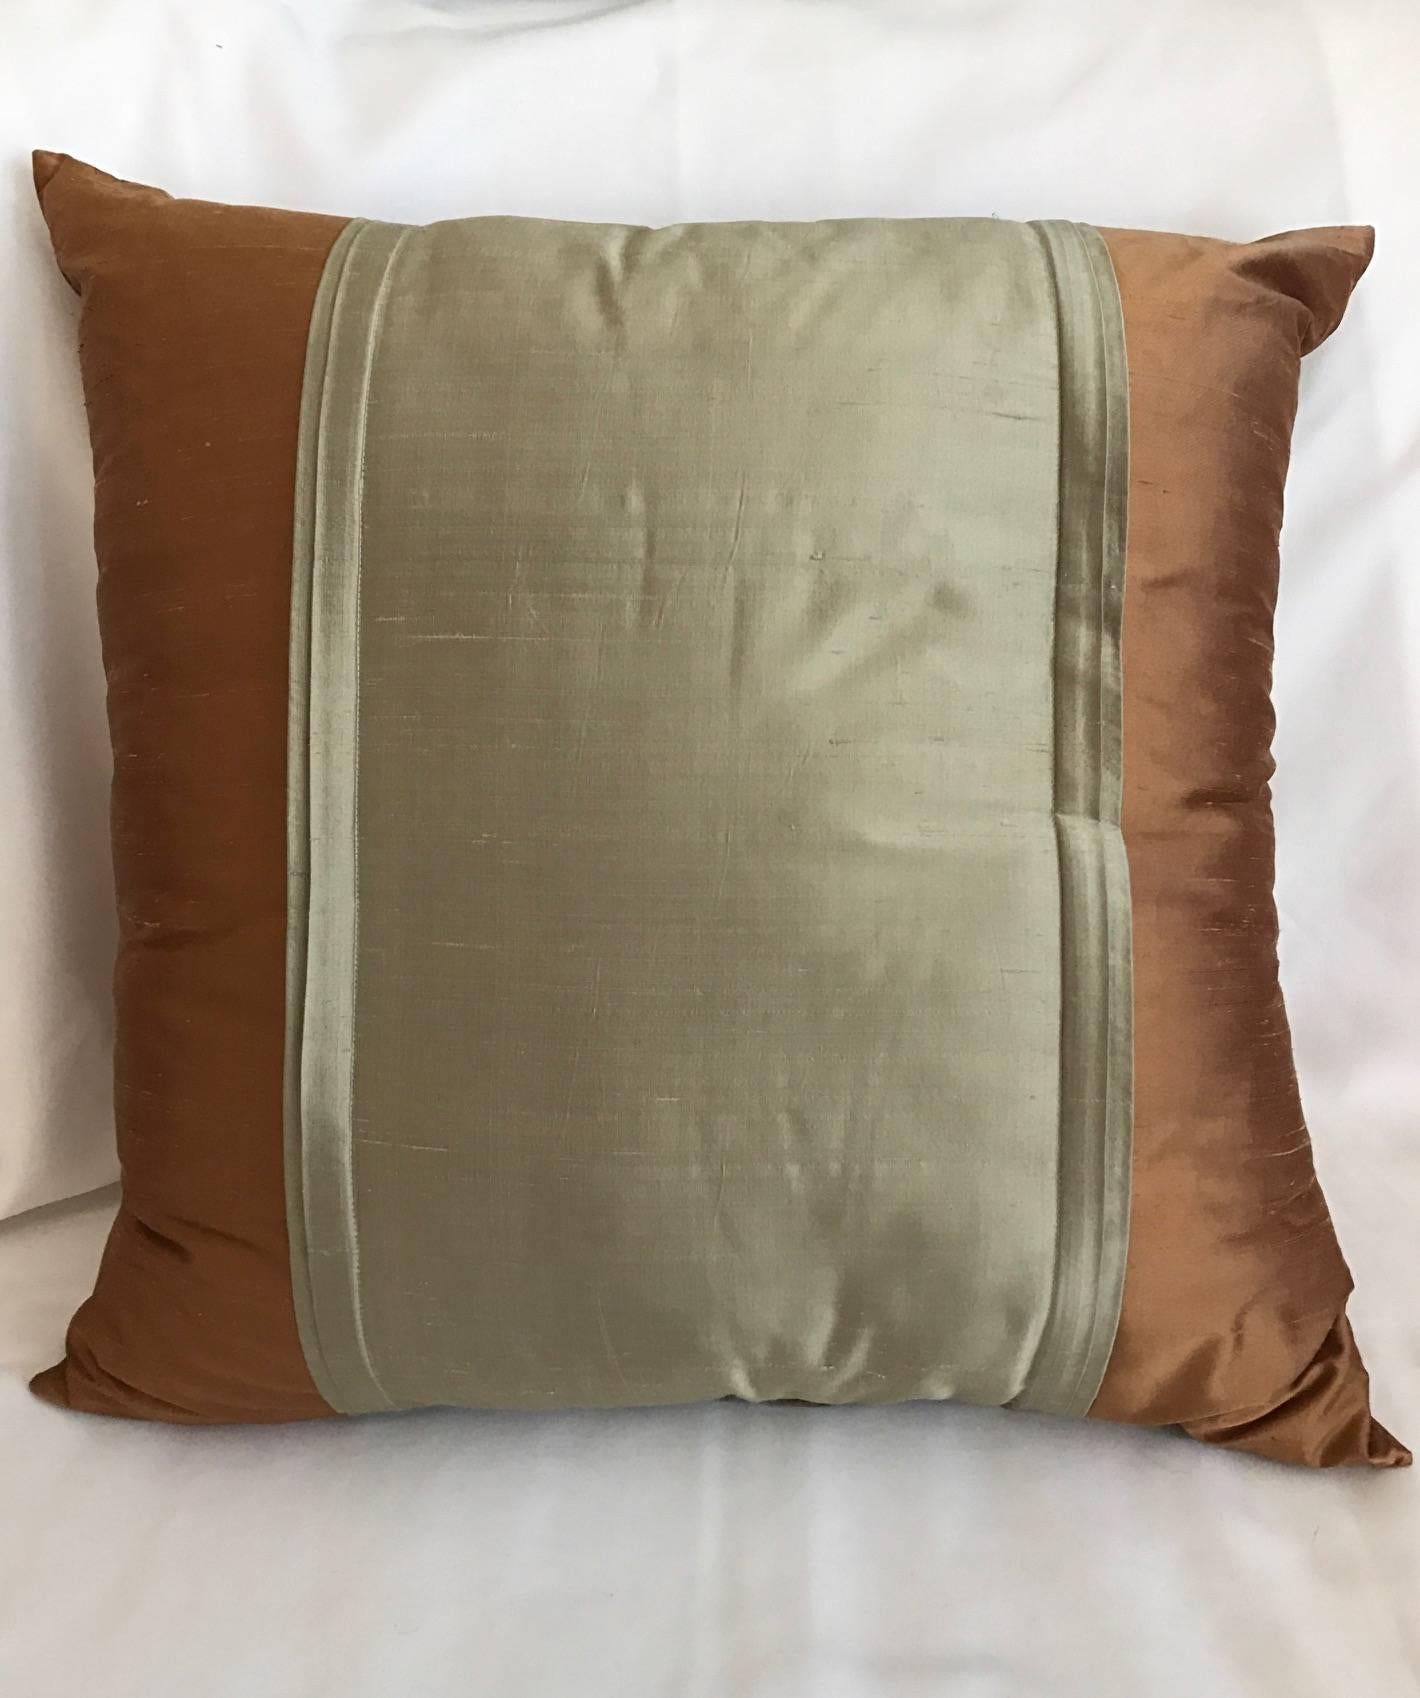 SALE Three Lee Jofa Silk Pillows Sandstone Brown, Graphite and Indian River Taup In Good Condition For Sale In Westport, CT